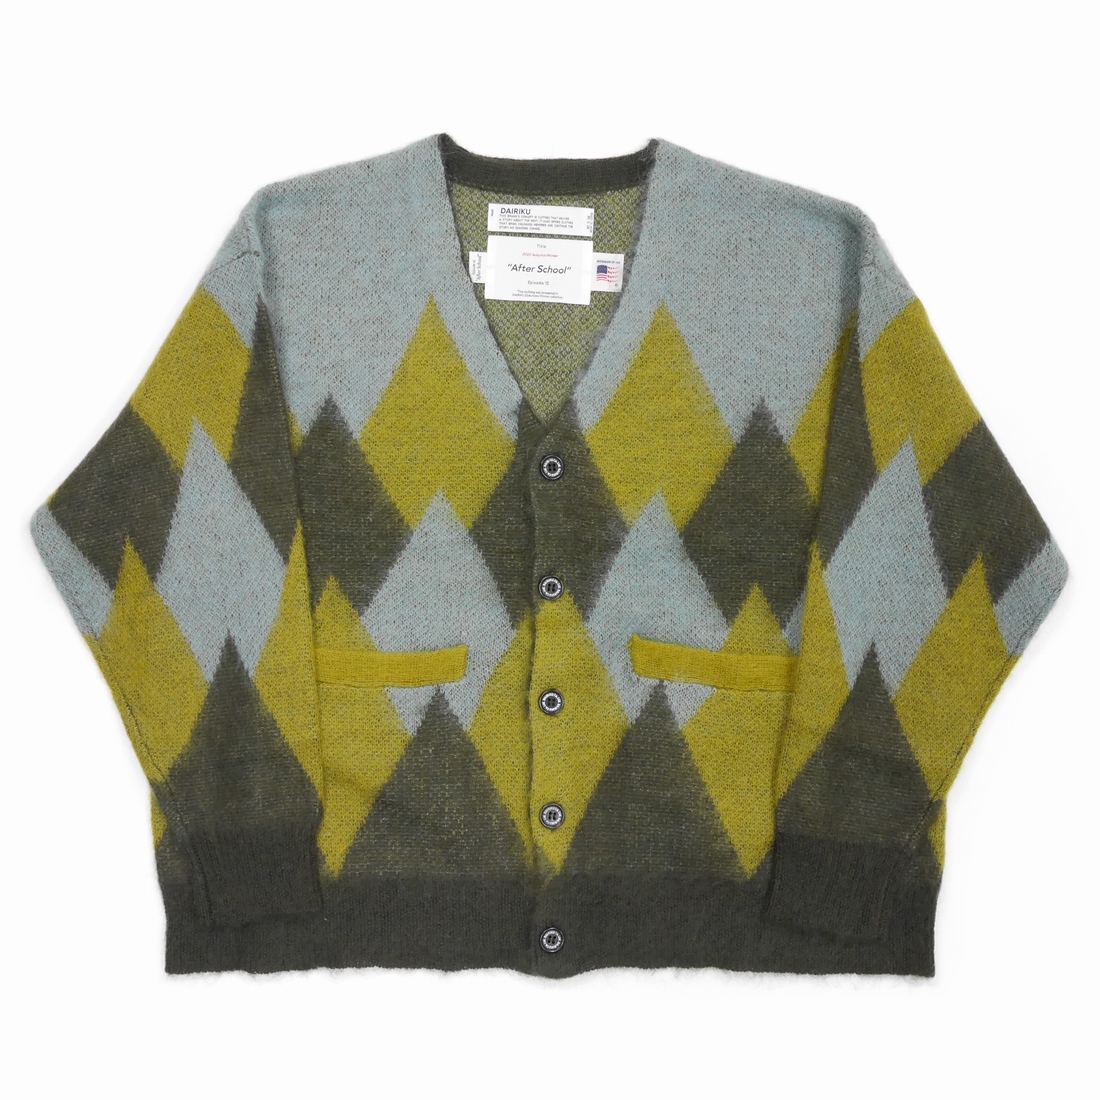 dairiku wool mohairカーディガン 22aw | camillevieraservices.com